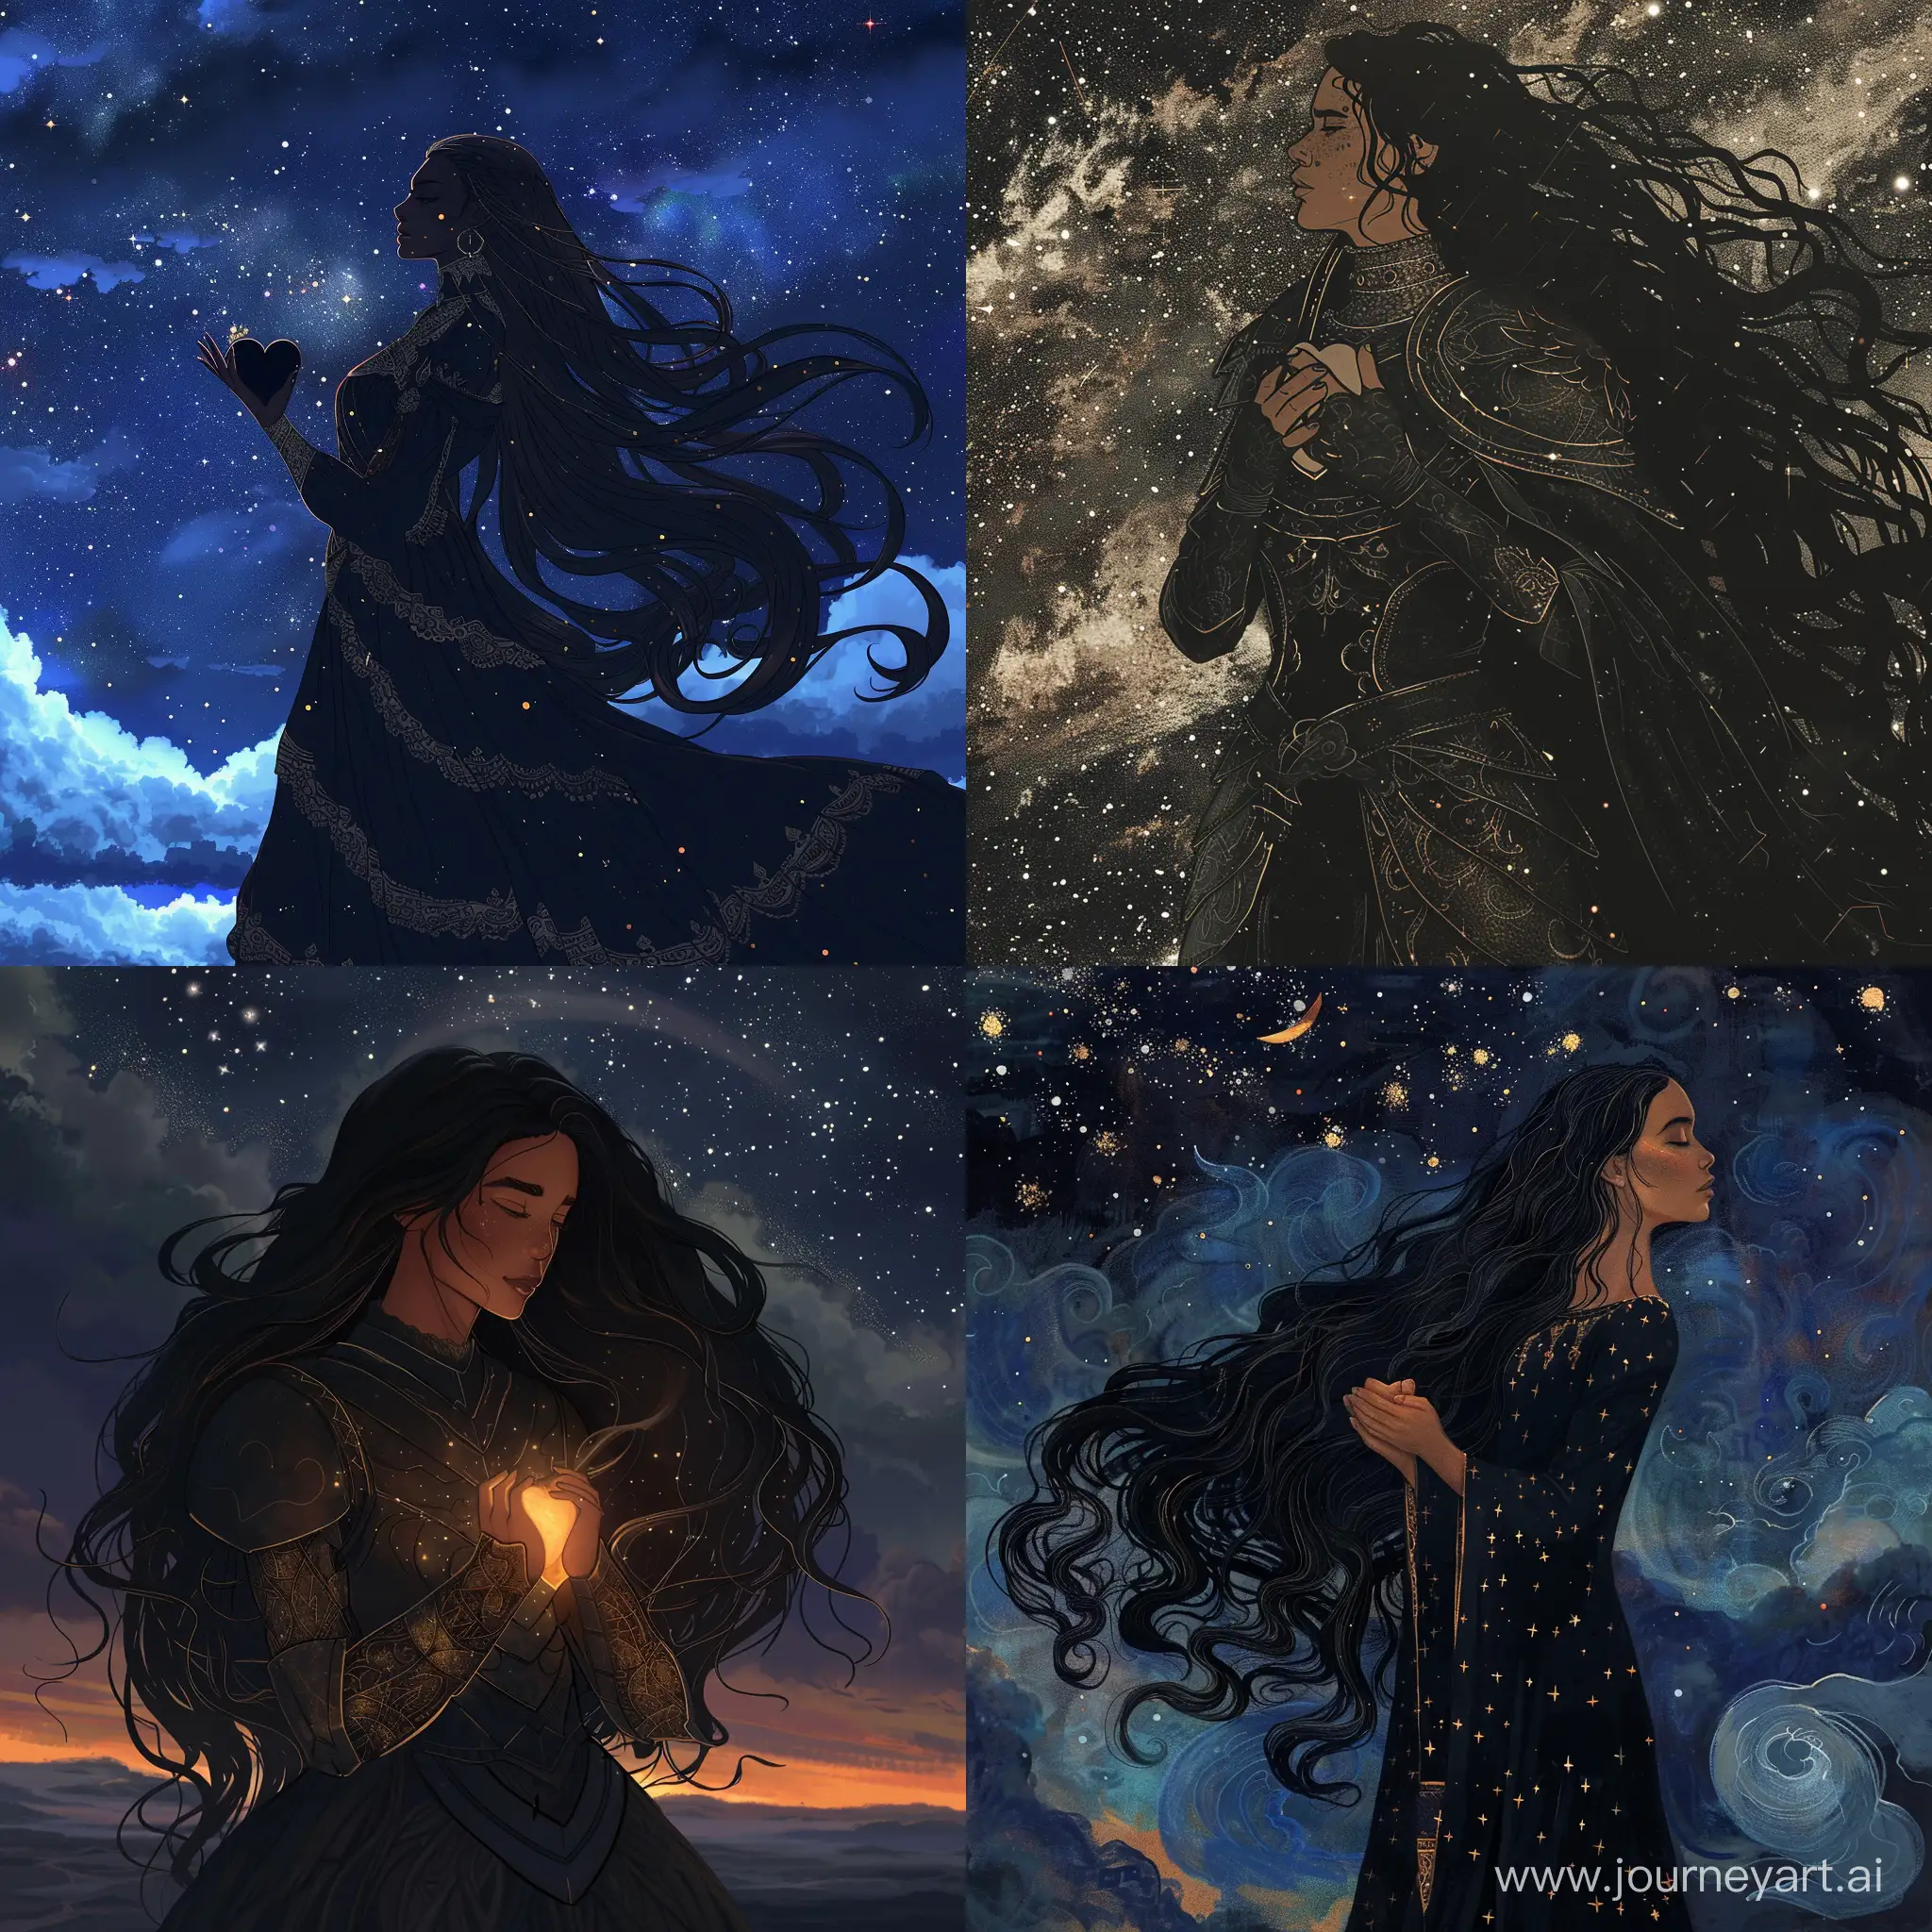 Mystical-Night-BlackHaired-Female-Warrior-Embracing-Her-Heart-under-the-Starry-Sky